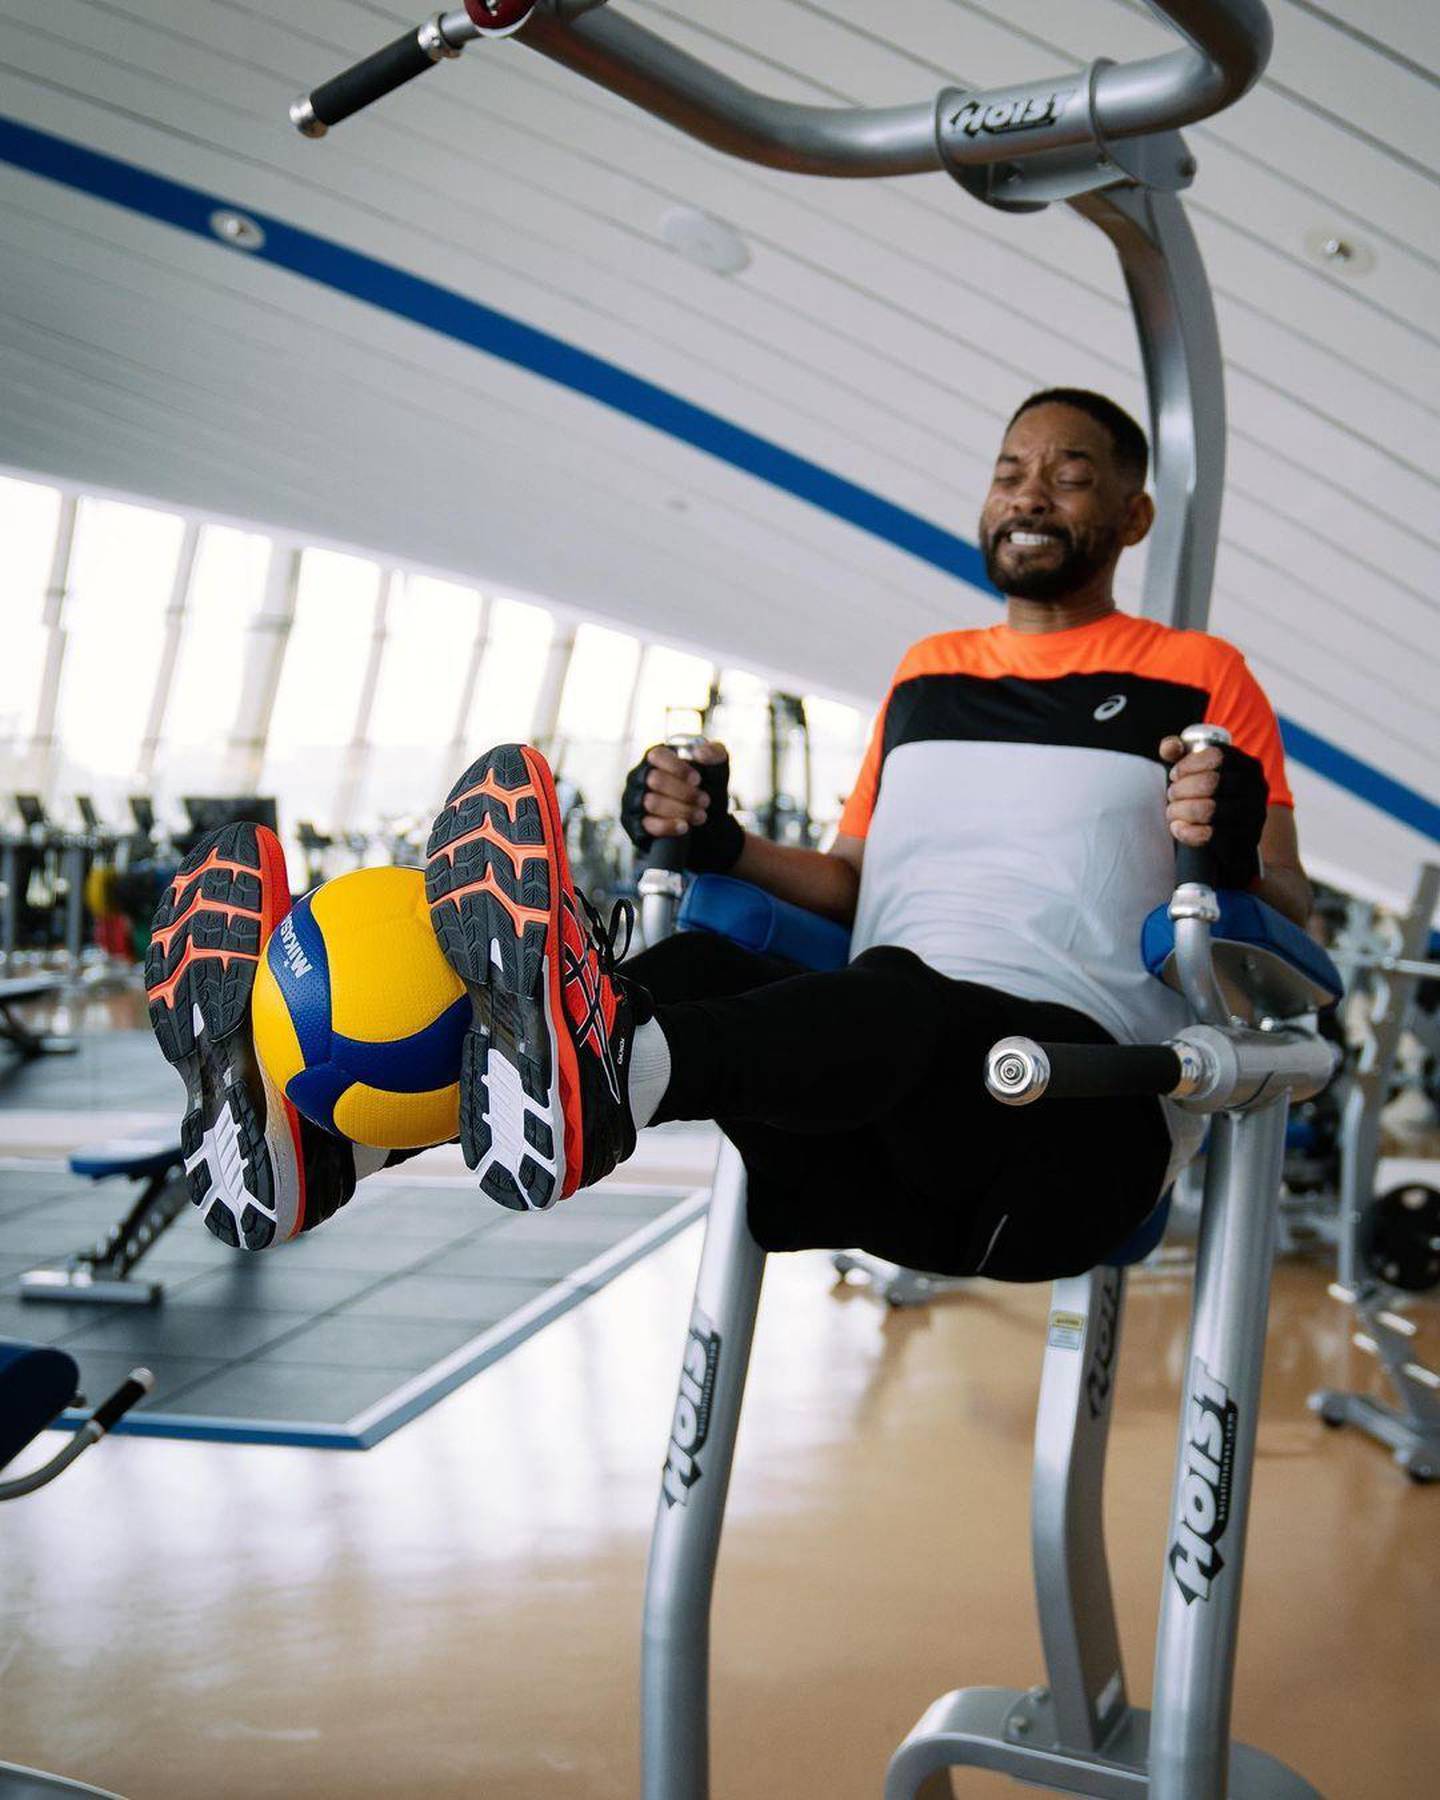 Will Smith working out in Dubai. Instagram / willsmith